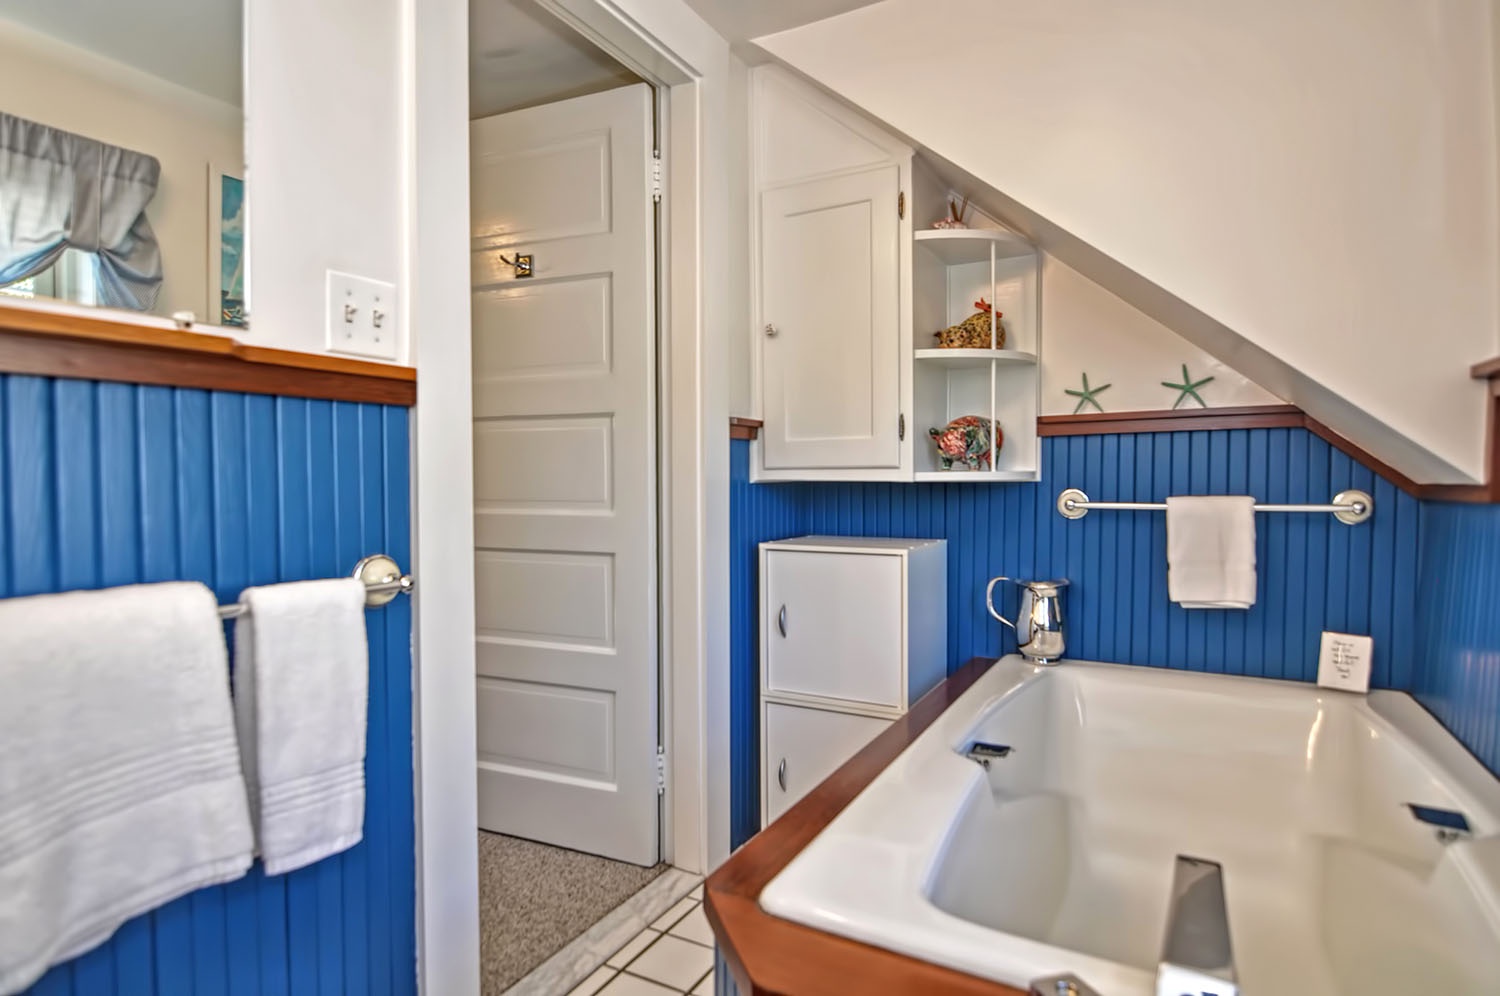 The second floor full bath has a large soaking tub (no shower).